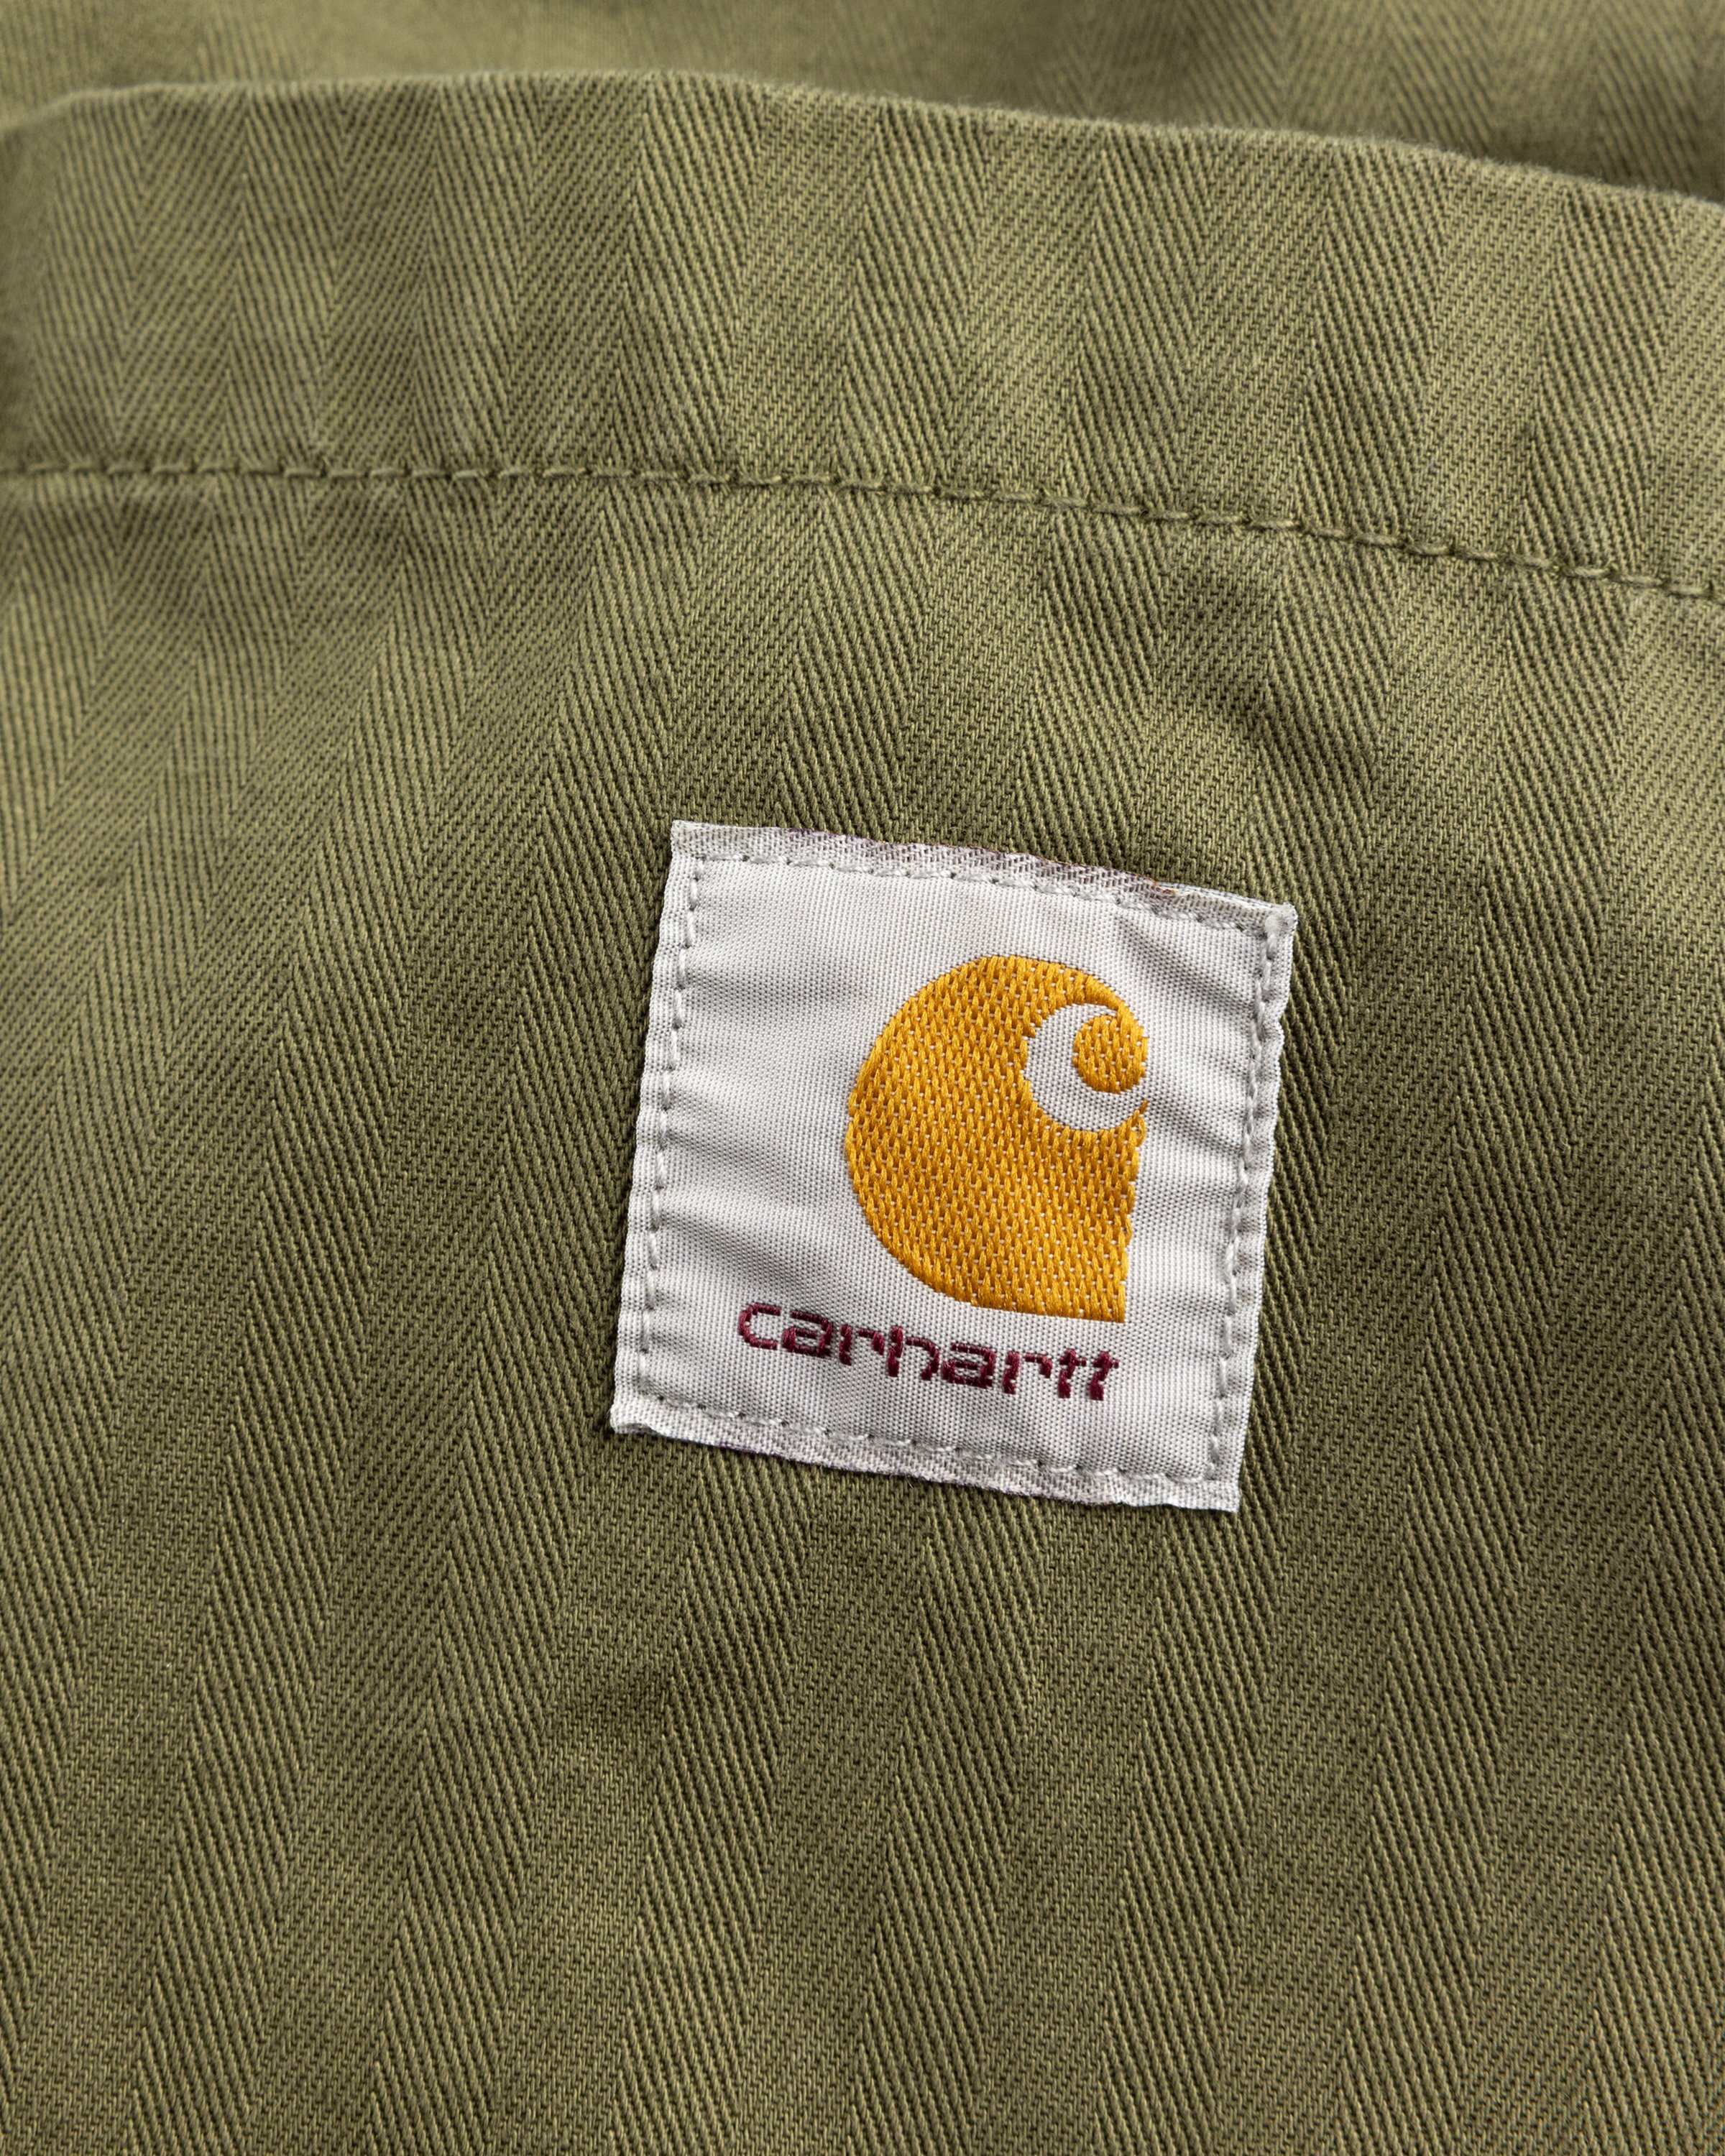 Carhartt WIP - Rainer Short Dundee /garment dyed - Clothing - Blue - Image 7